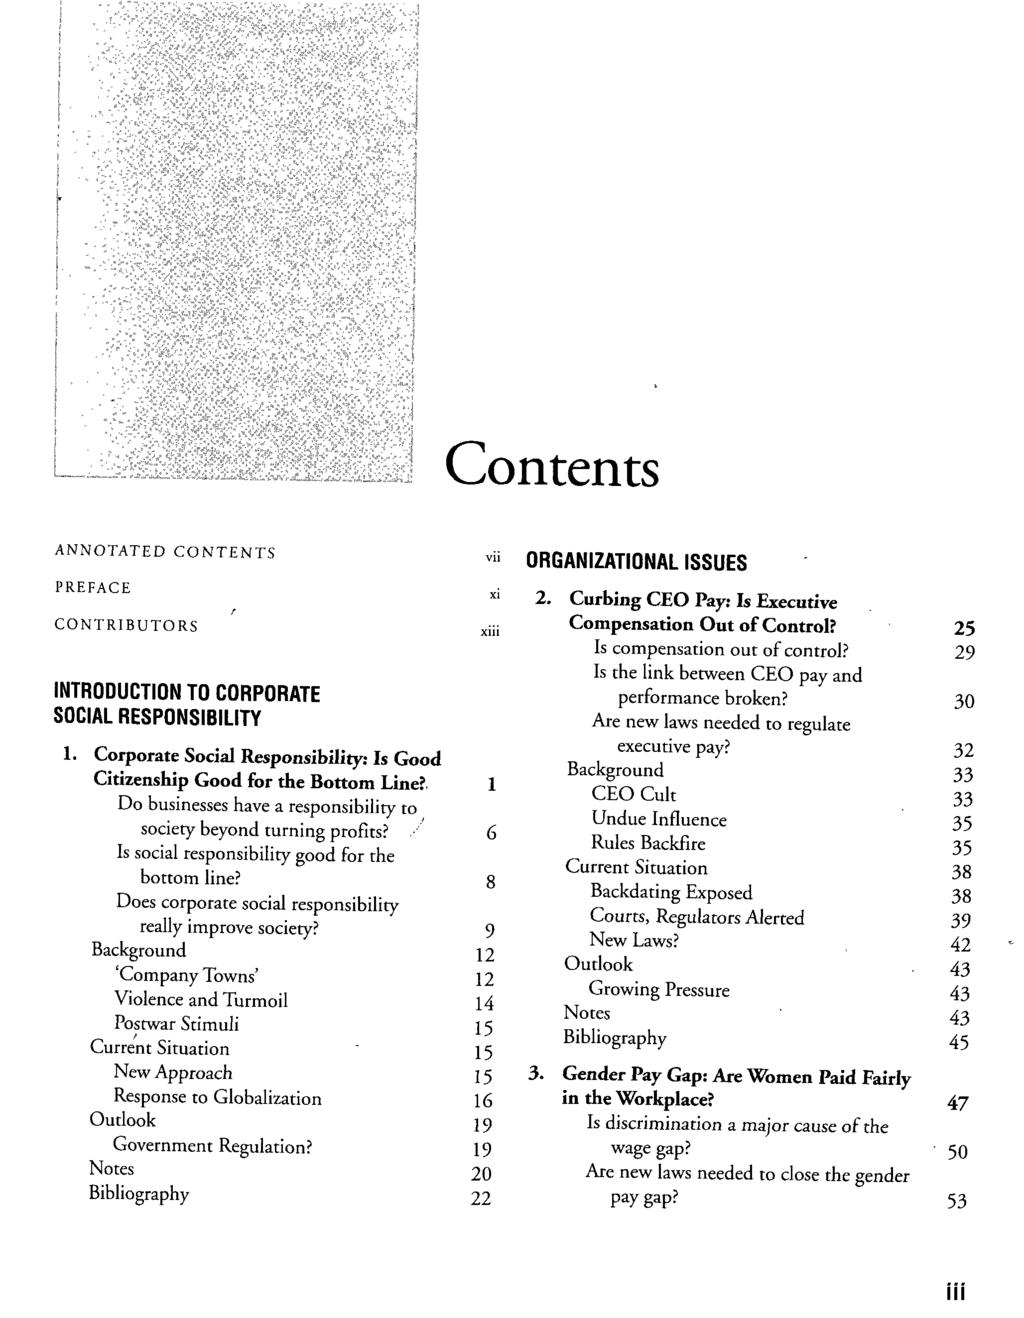 Contents ANNOTATED CONTENTS PREFACE CONTRIBUTORS INTRODUCTION TO CORPORATE SOCIAL RESPONSIBILITY 1. Corporate Social Responsibility: Is Good Citizenship Good for the Bottom Line?